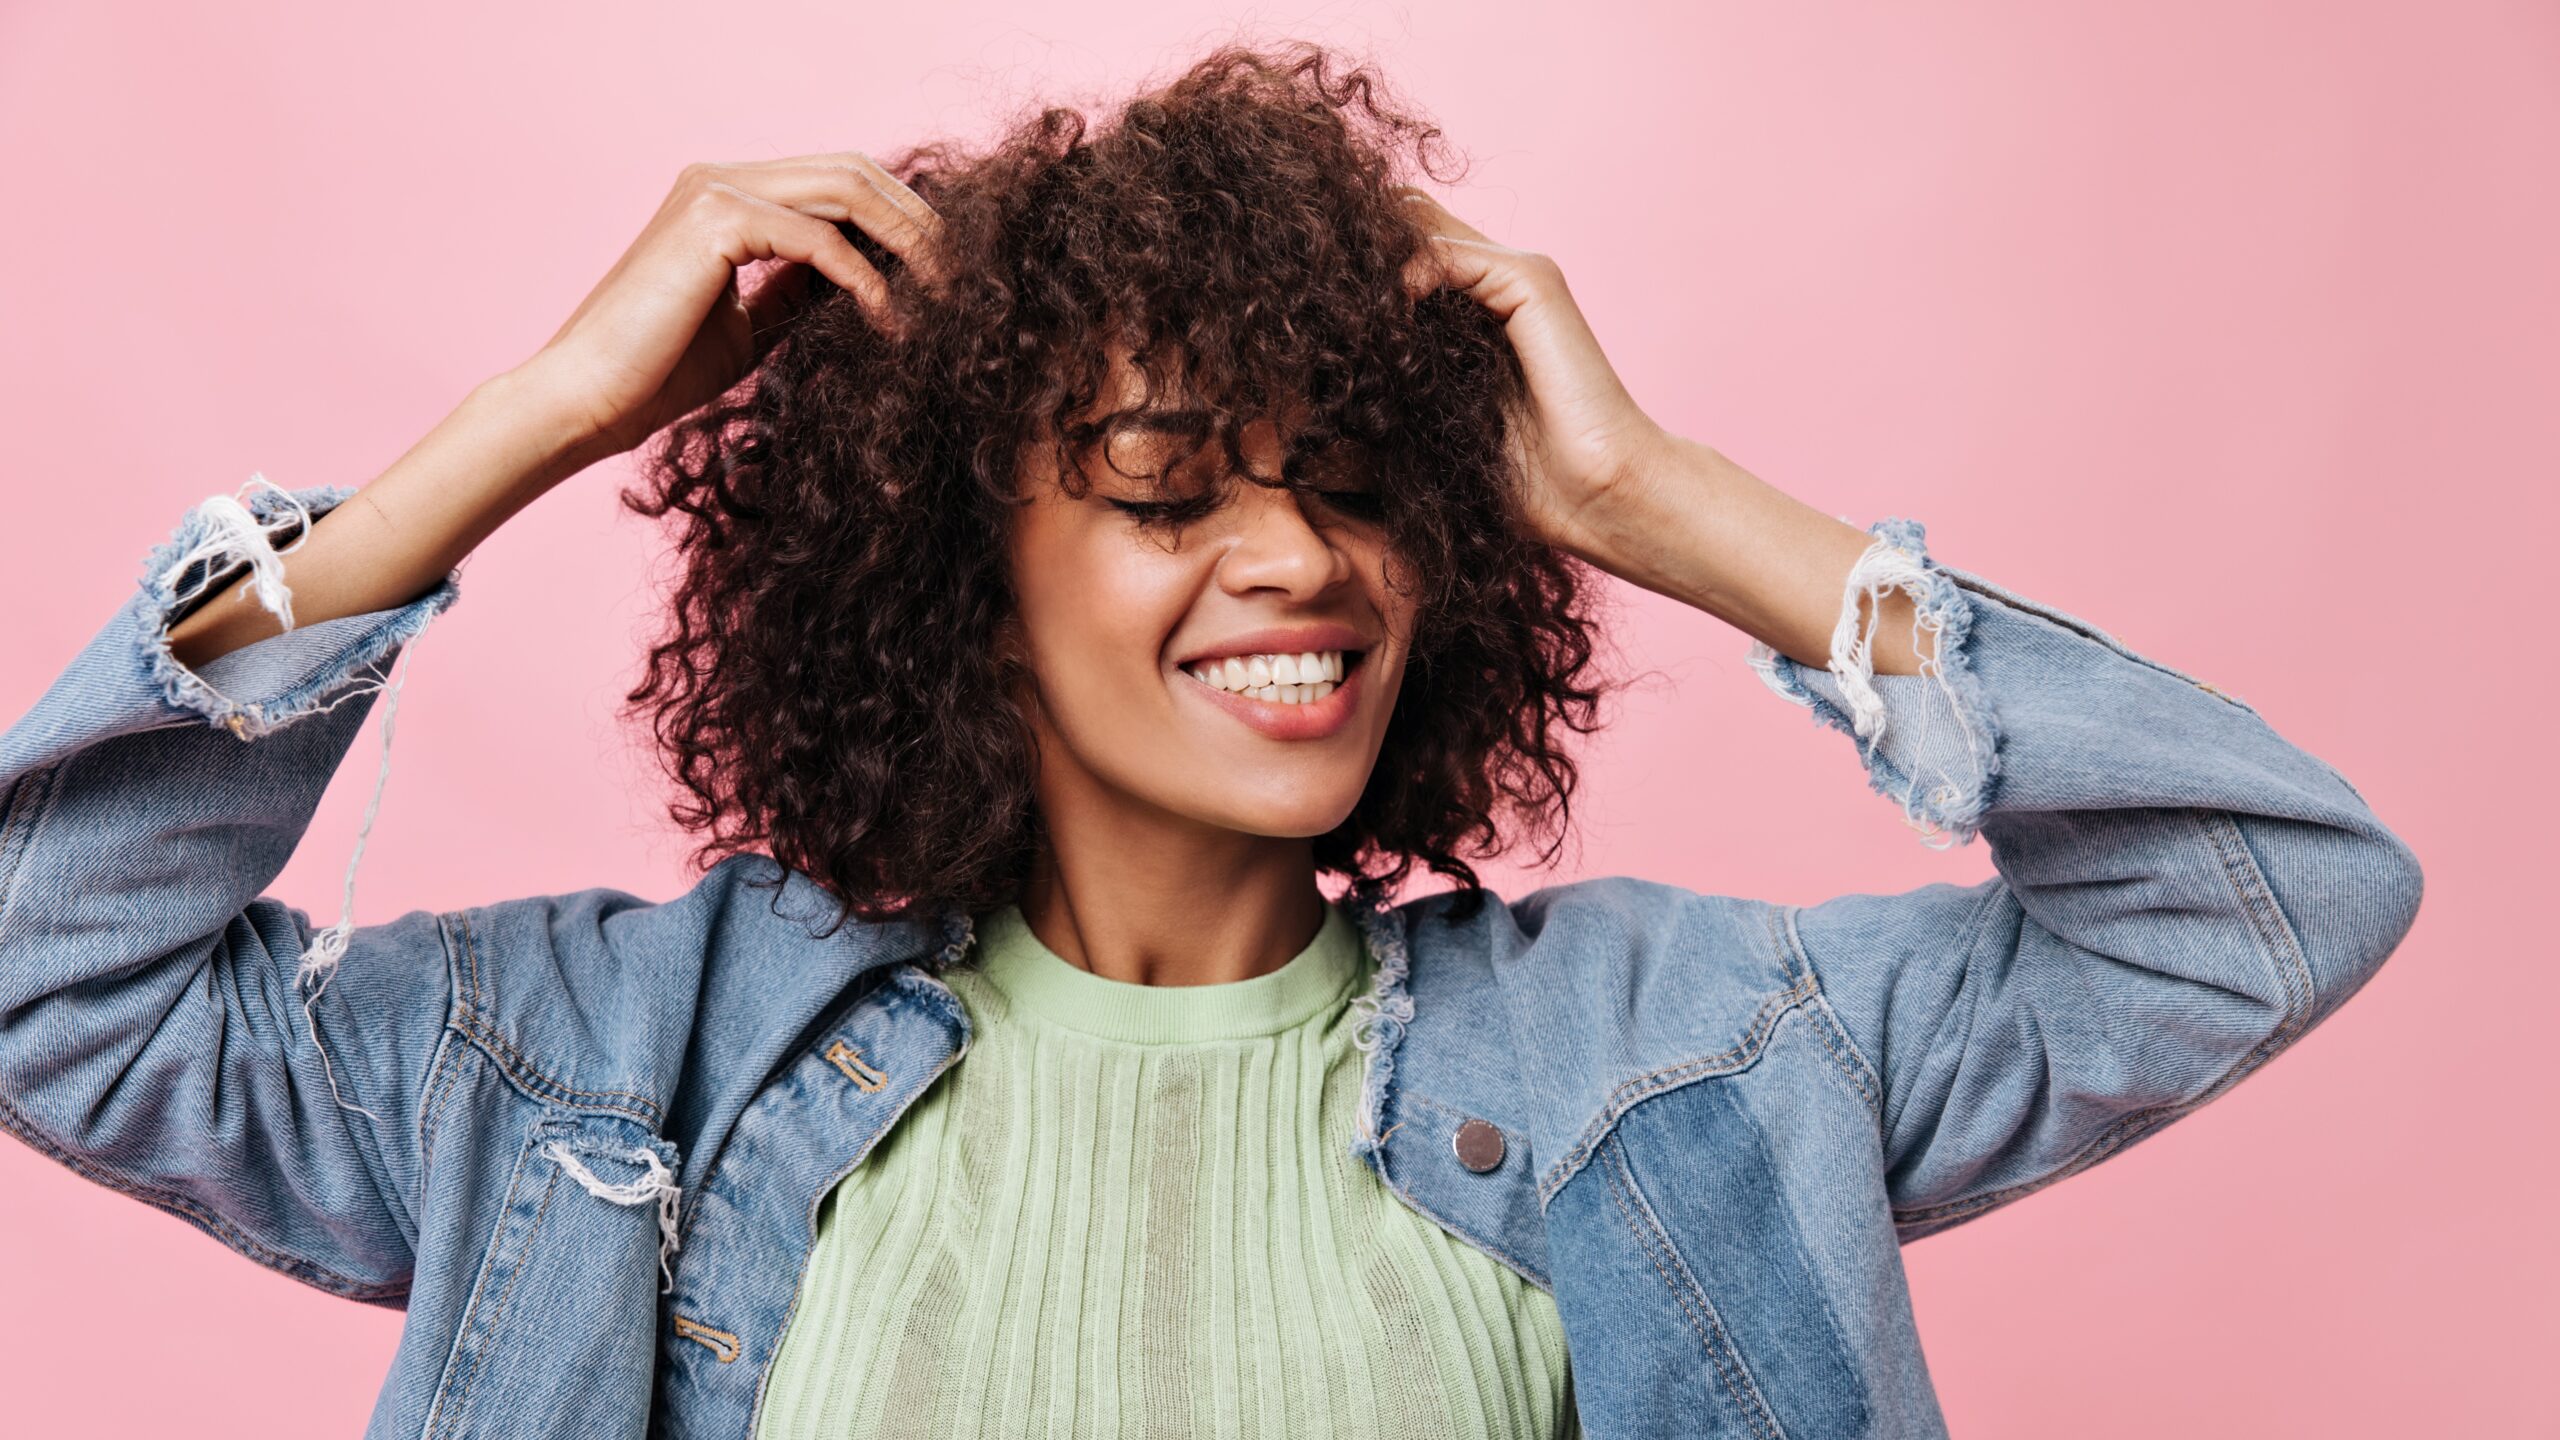 Young girl dances happy on pink background and touches her curly hair